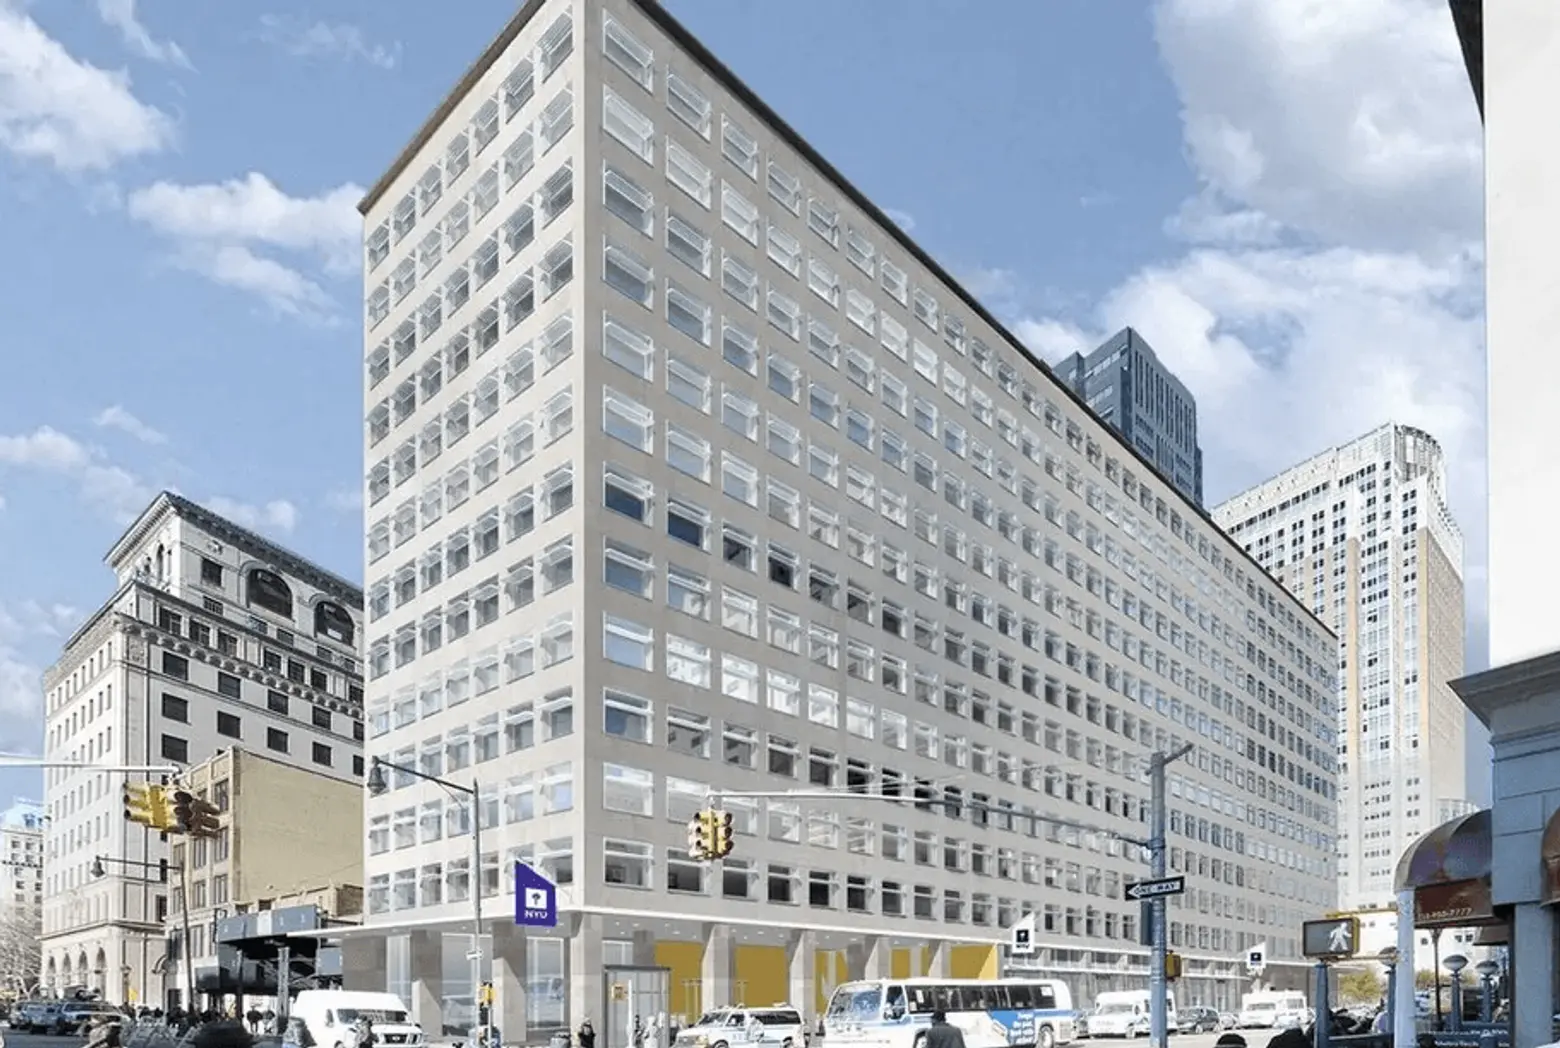 NYU’s Brooklyn tech campus expansion opens in former MTA headquarters